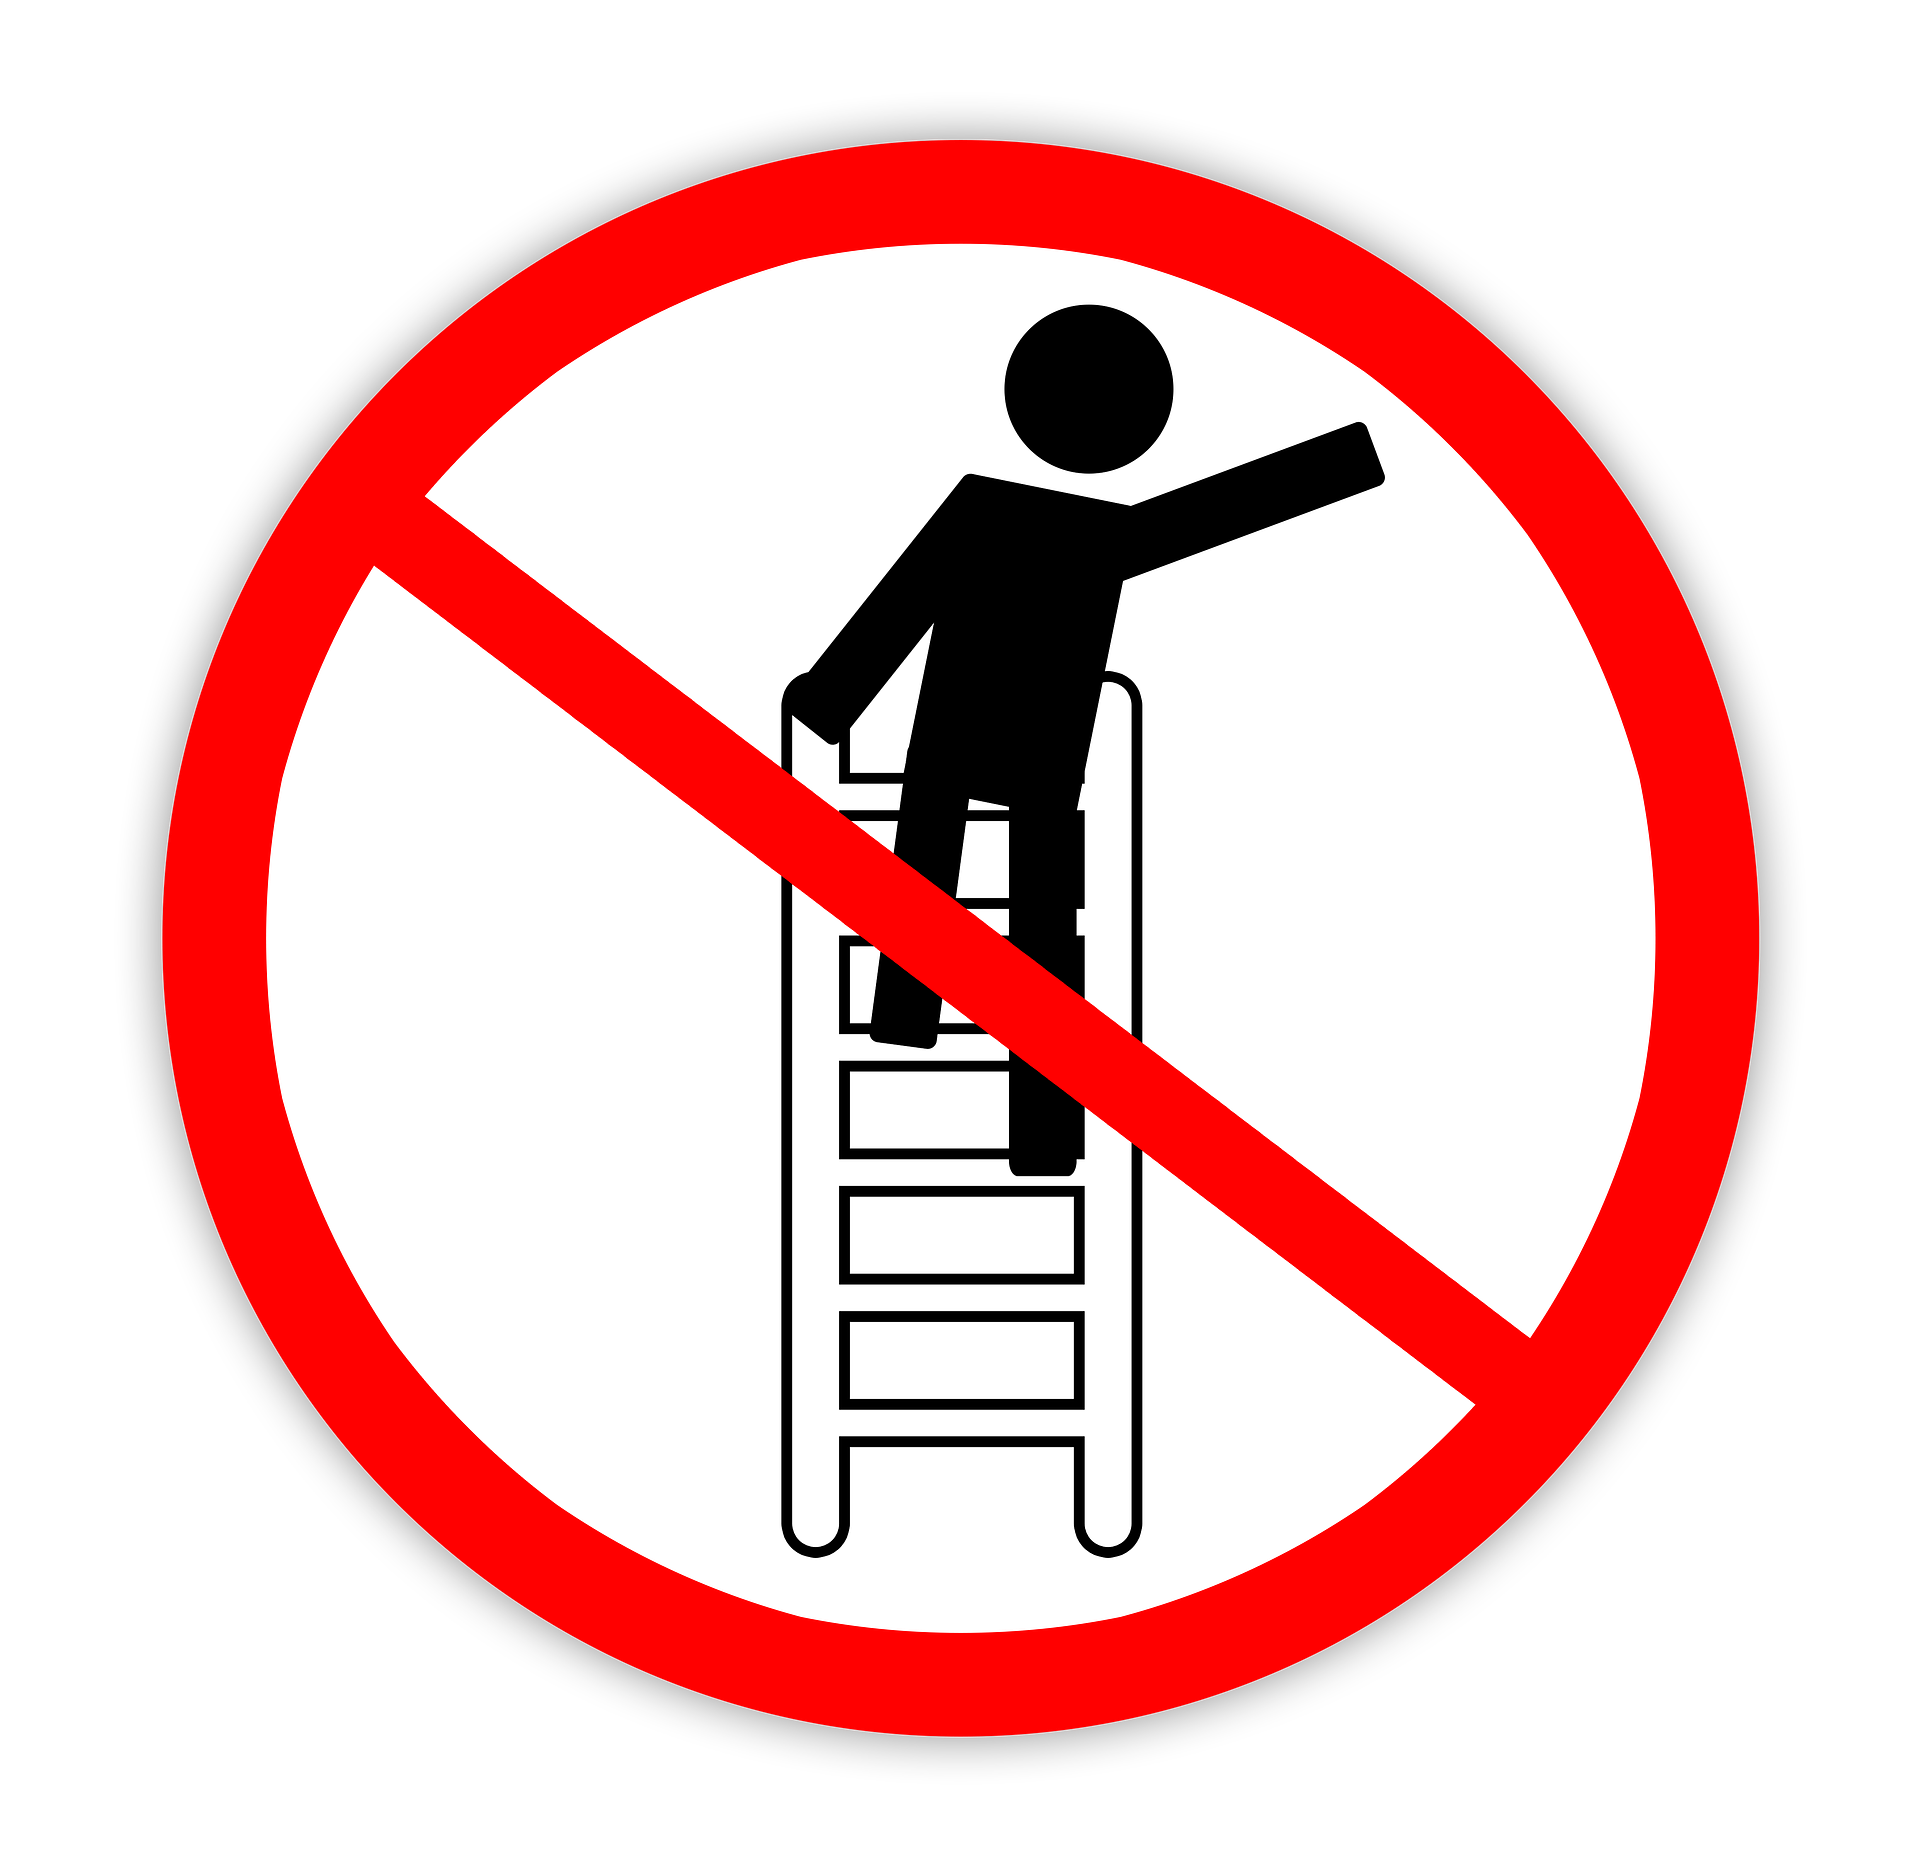 ladder clipart industrial